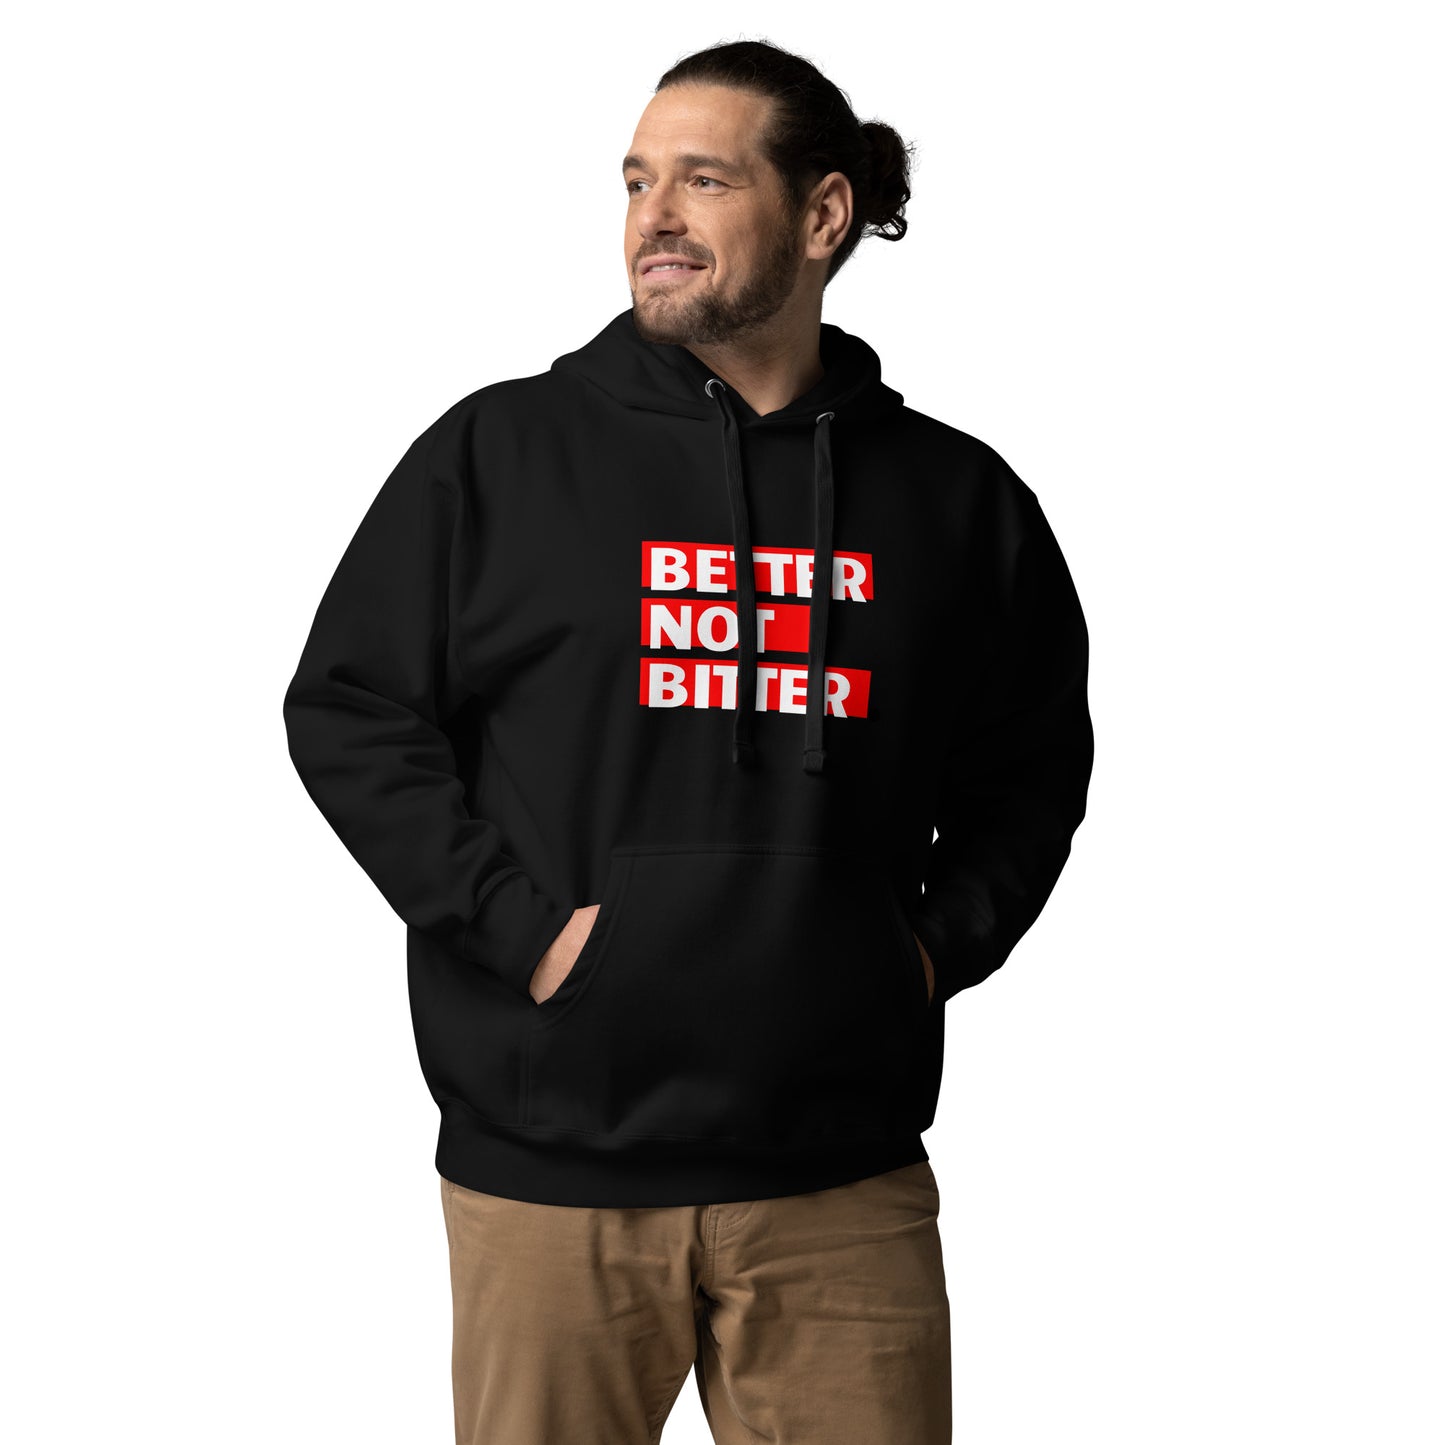 Better Not Bitter - Unisex Hoodie with Front Pouch